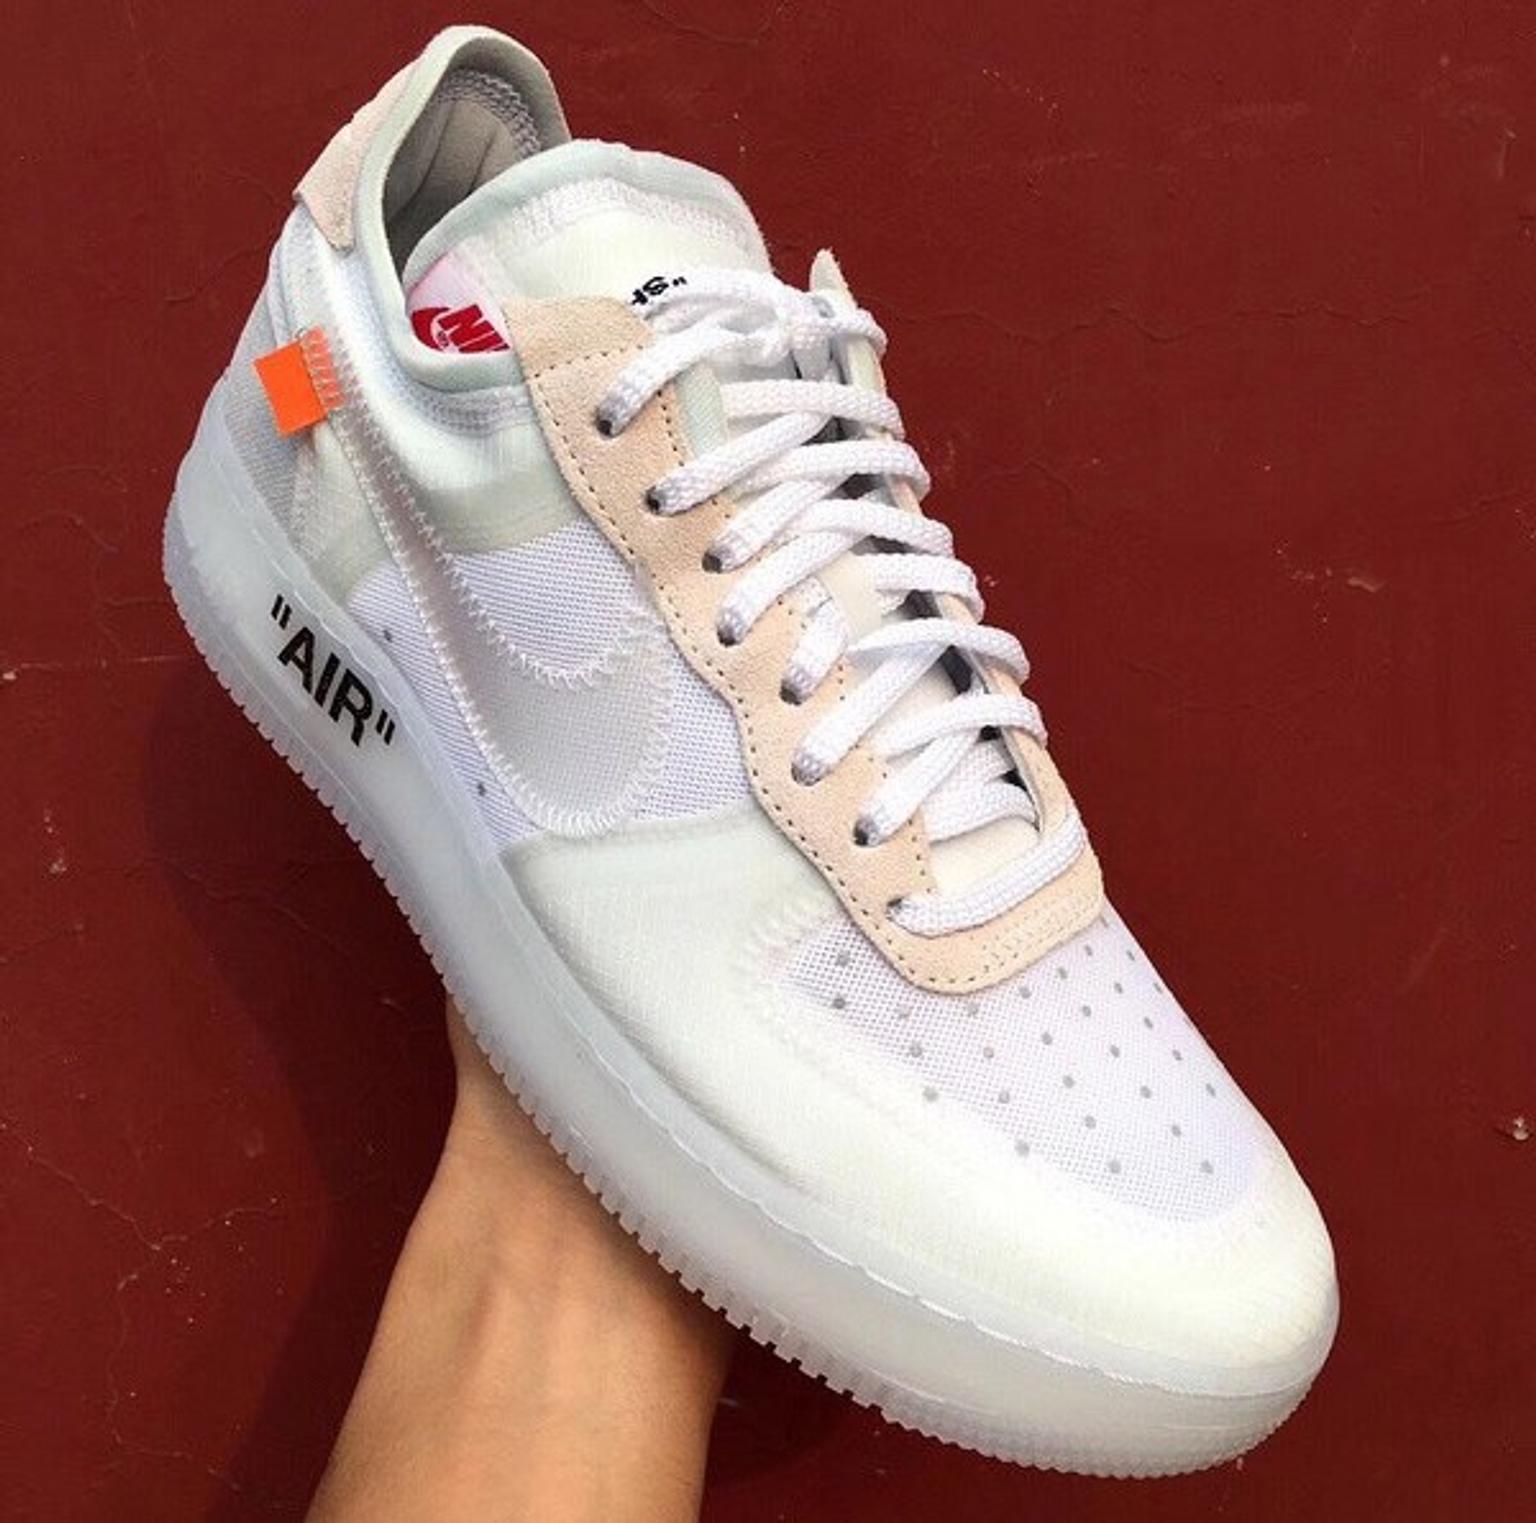 Nike X Off White in 20144 Milano for €600.00 for sale | Shpock